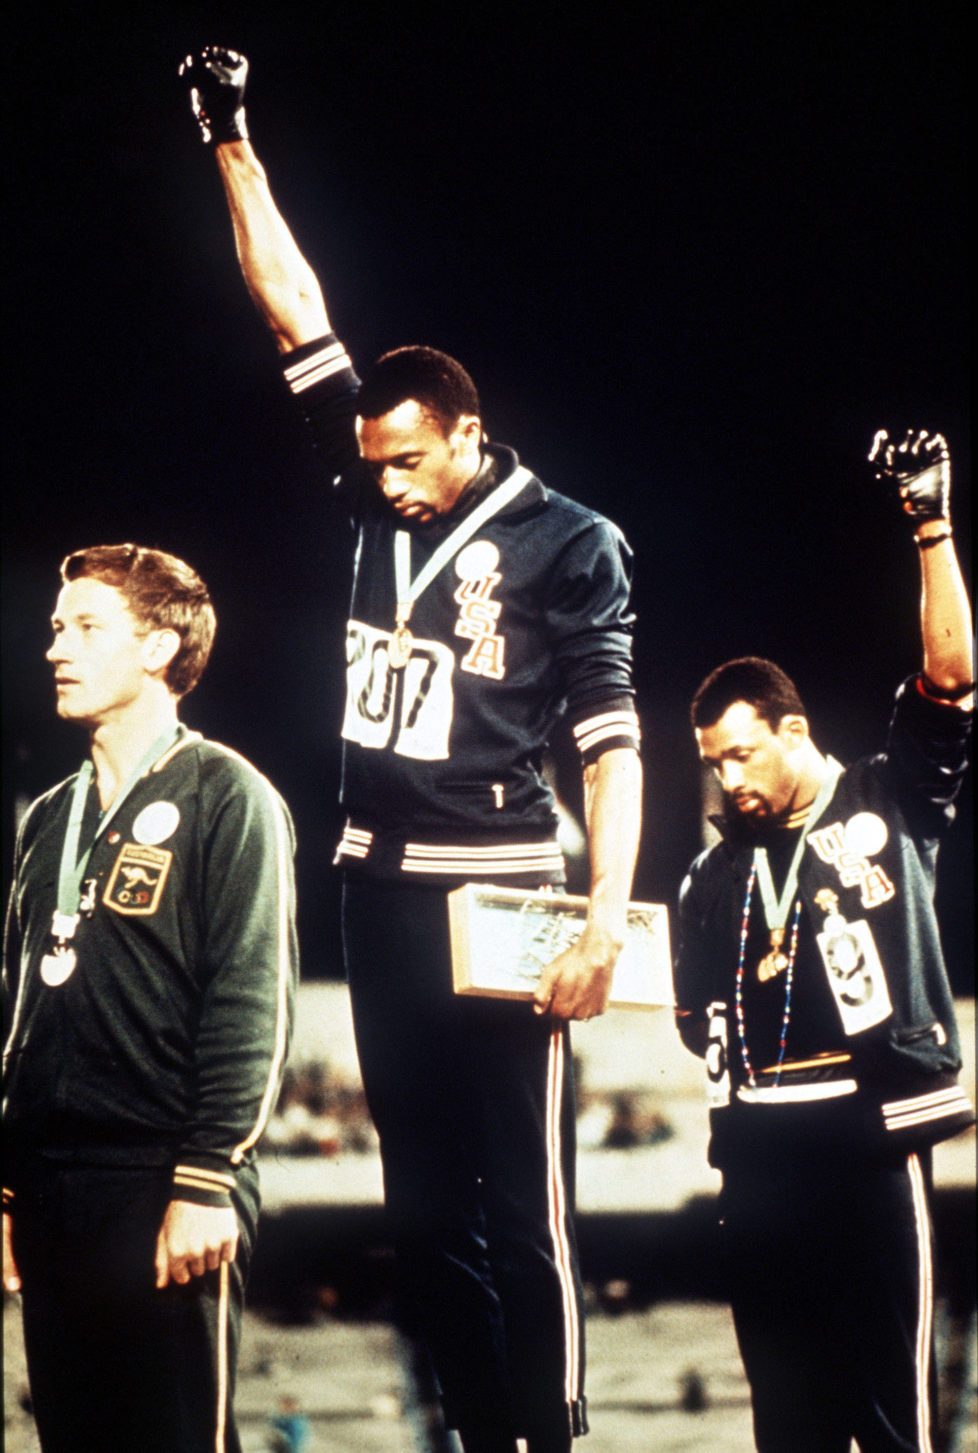 1968 Olympic Games, Mexico City, Mexico, Men's 200 Metres Final, USA gold medallist Tommie Smith (C) and bronze medallist John Carlos give the black power salutes as an anti-racial protest as they stand on the podium with Australian silver medallist Peter Norman (Photo by Rolls Press/Popperfoto/Getty Images)